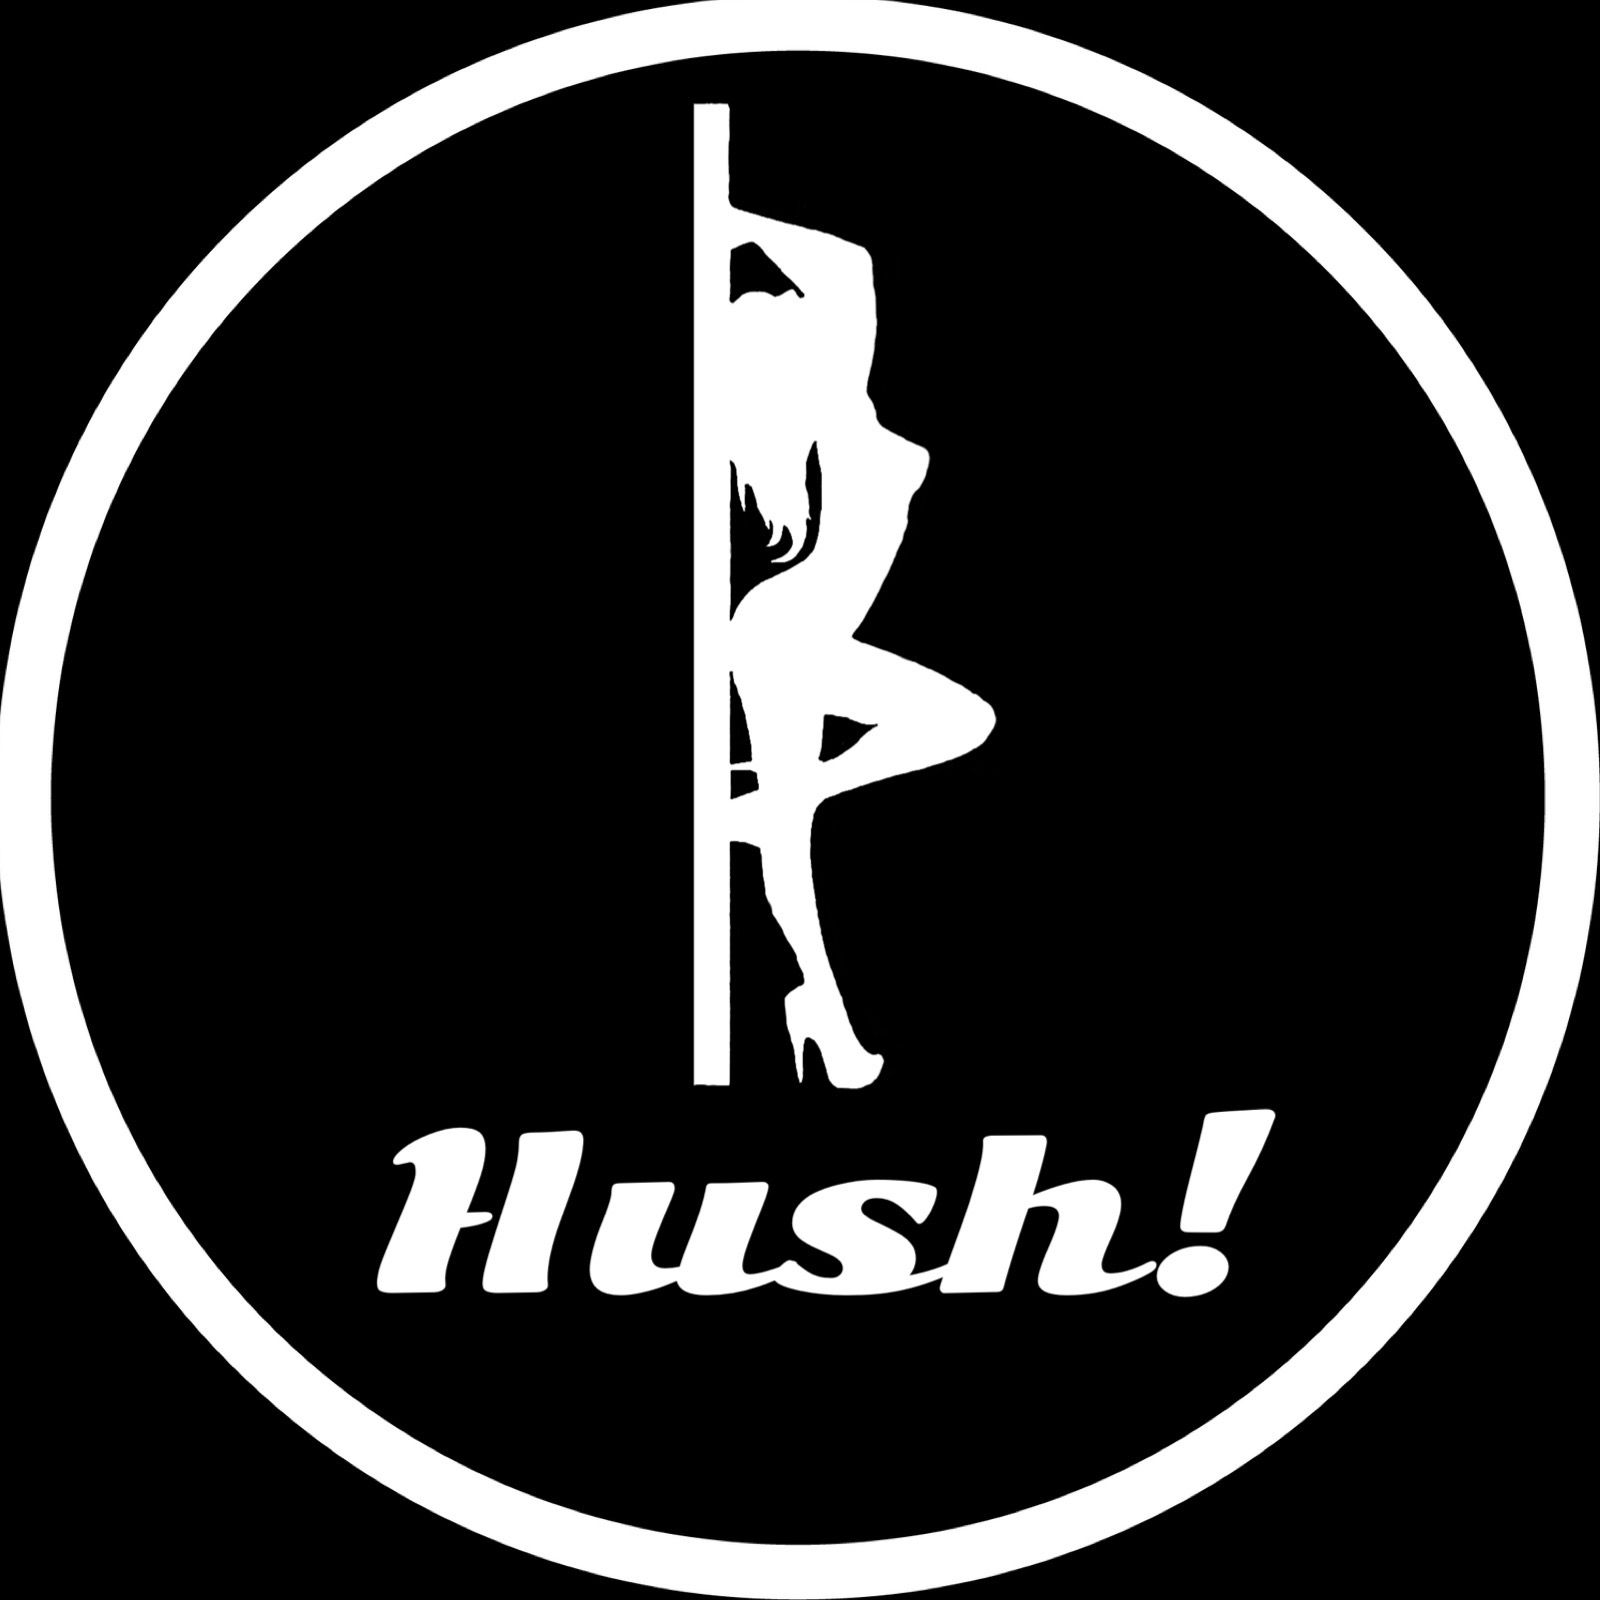 Hush! - Hush! Vol. 67- One on One with Britney Amber